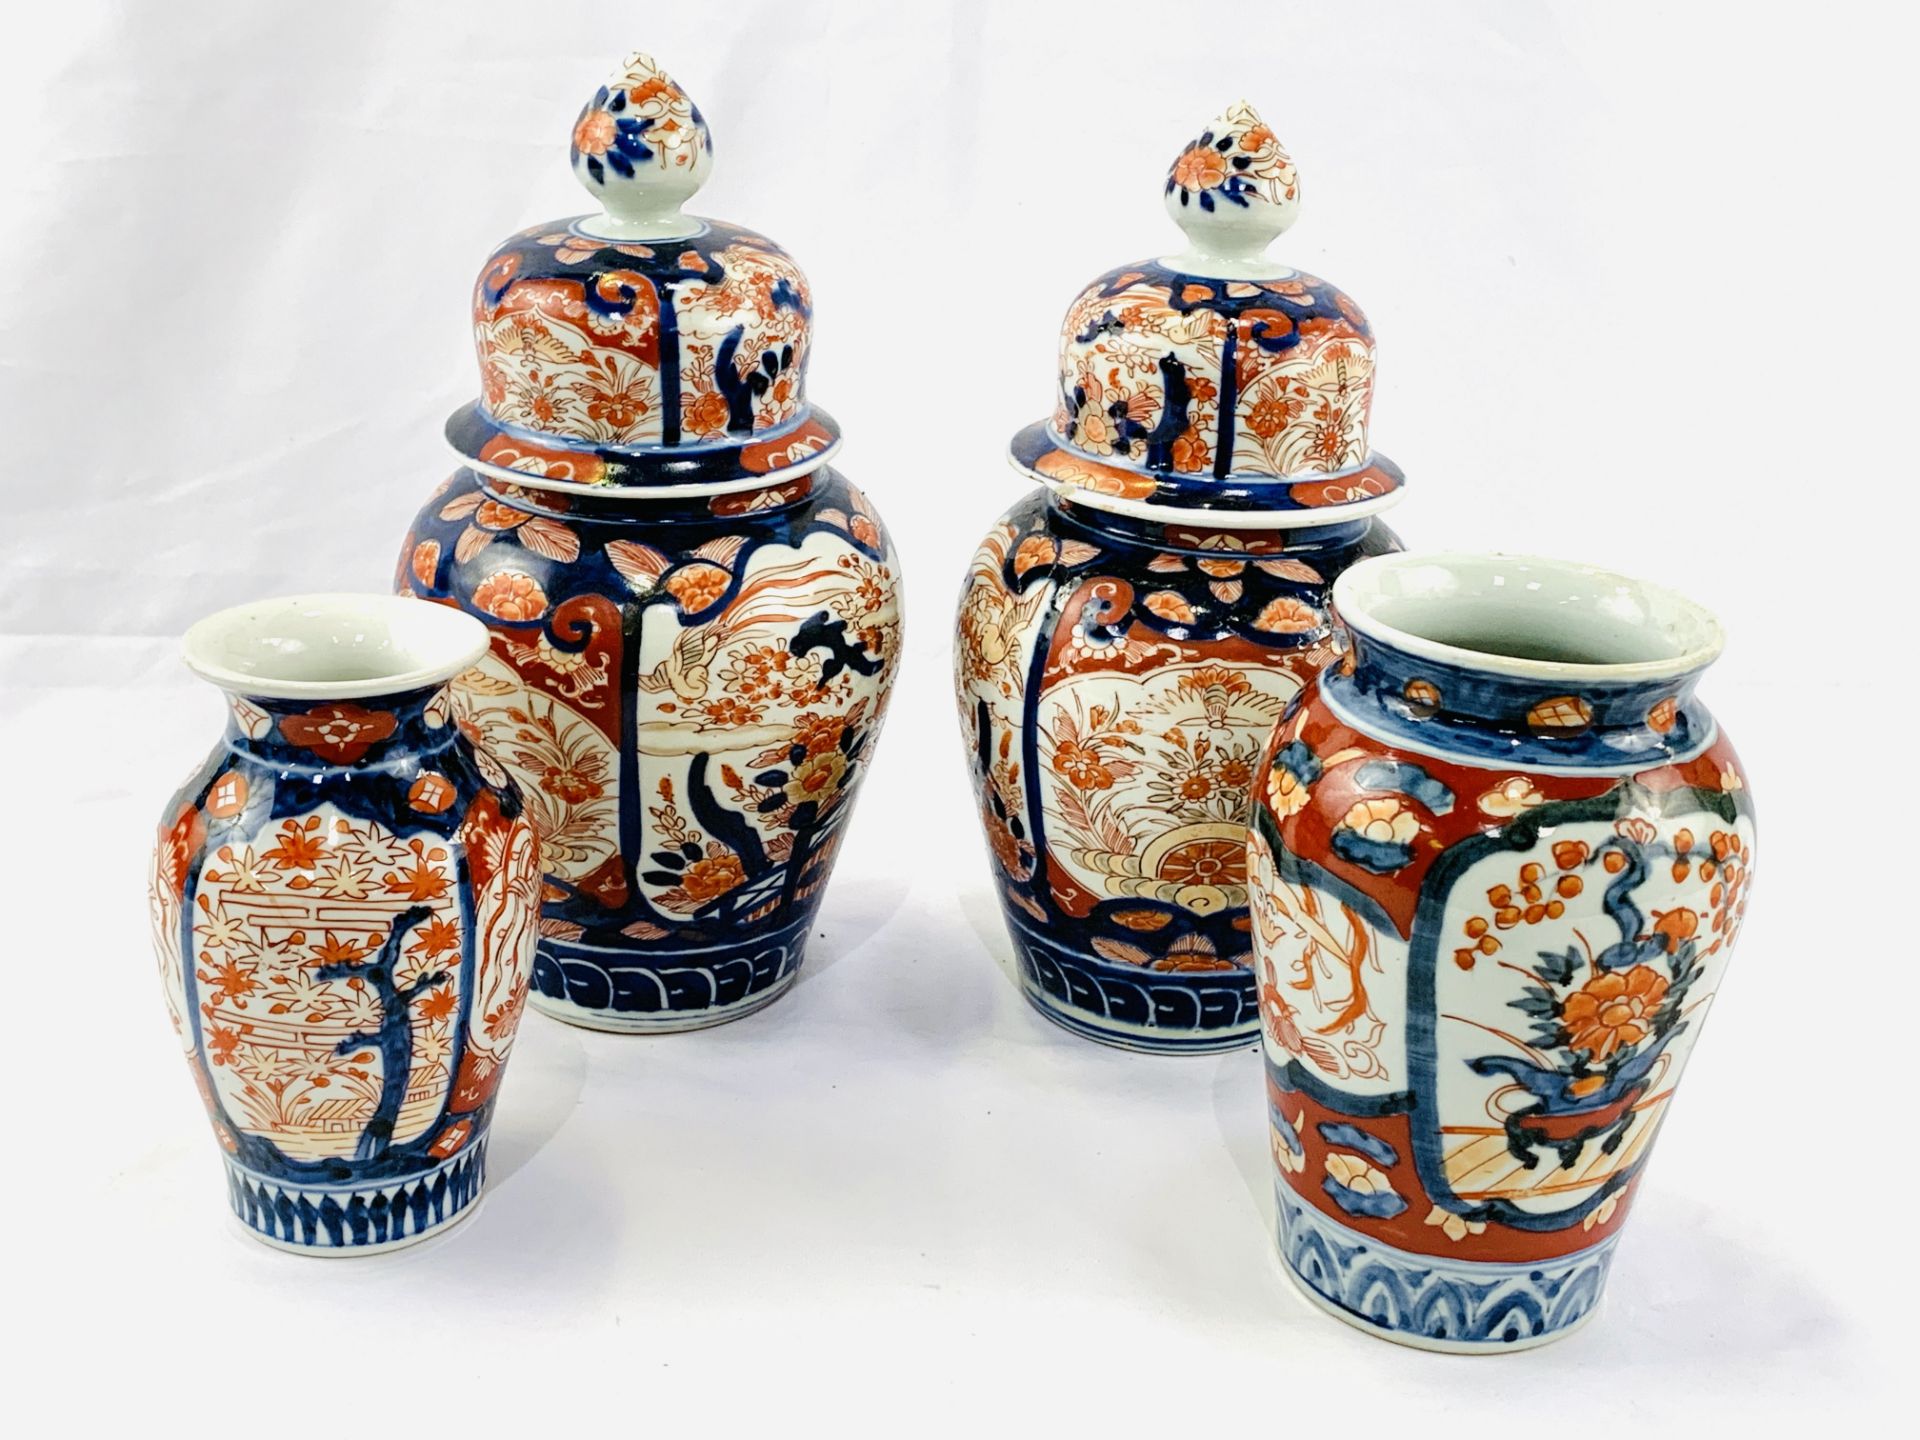 Collection of Imari pottery